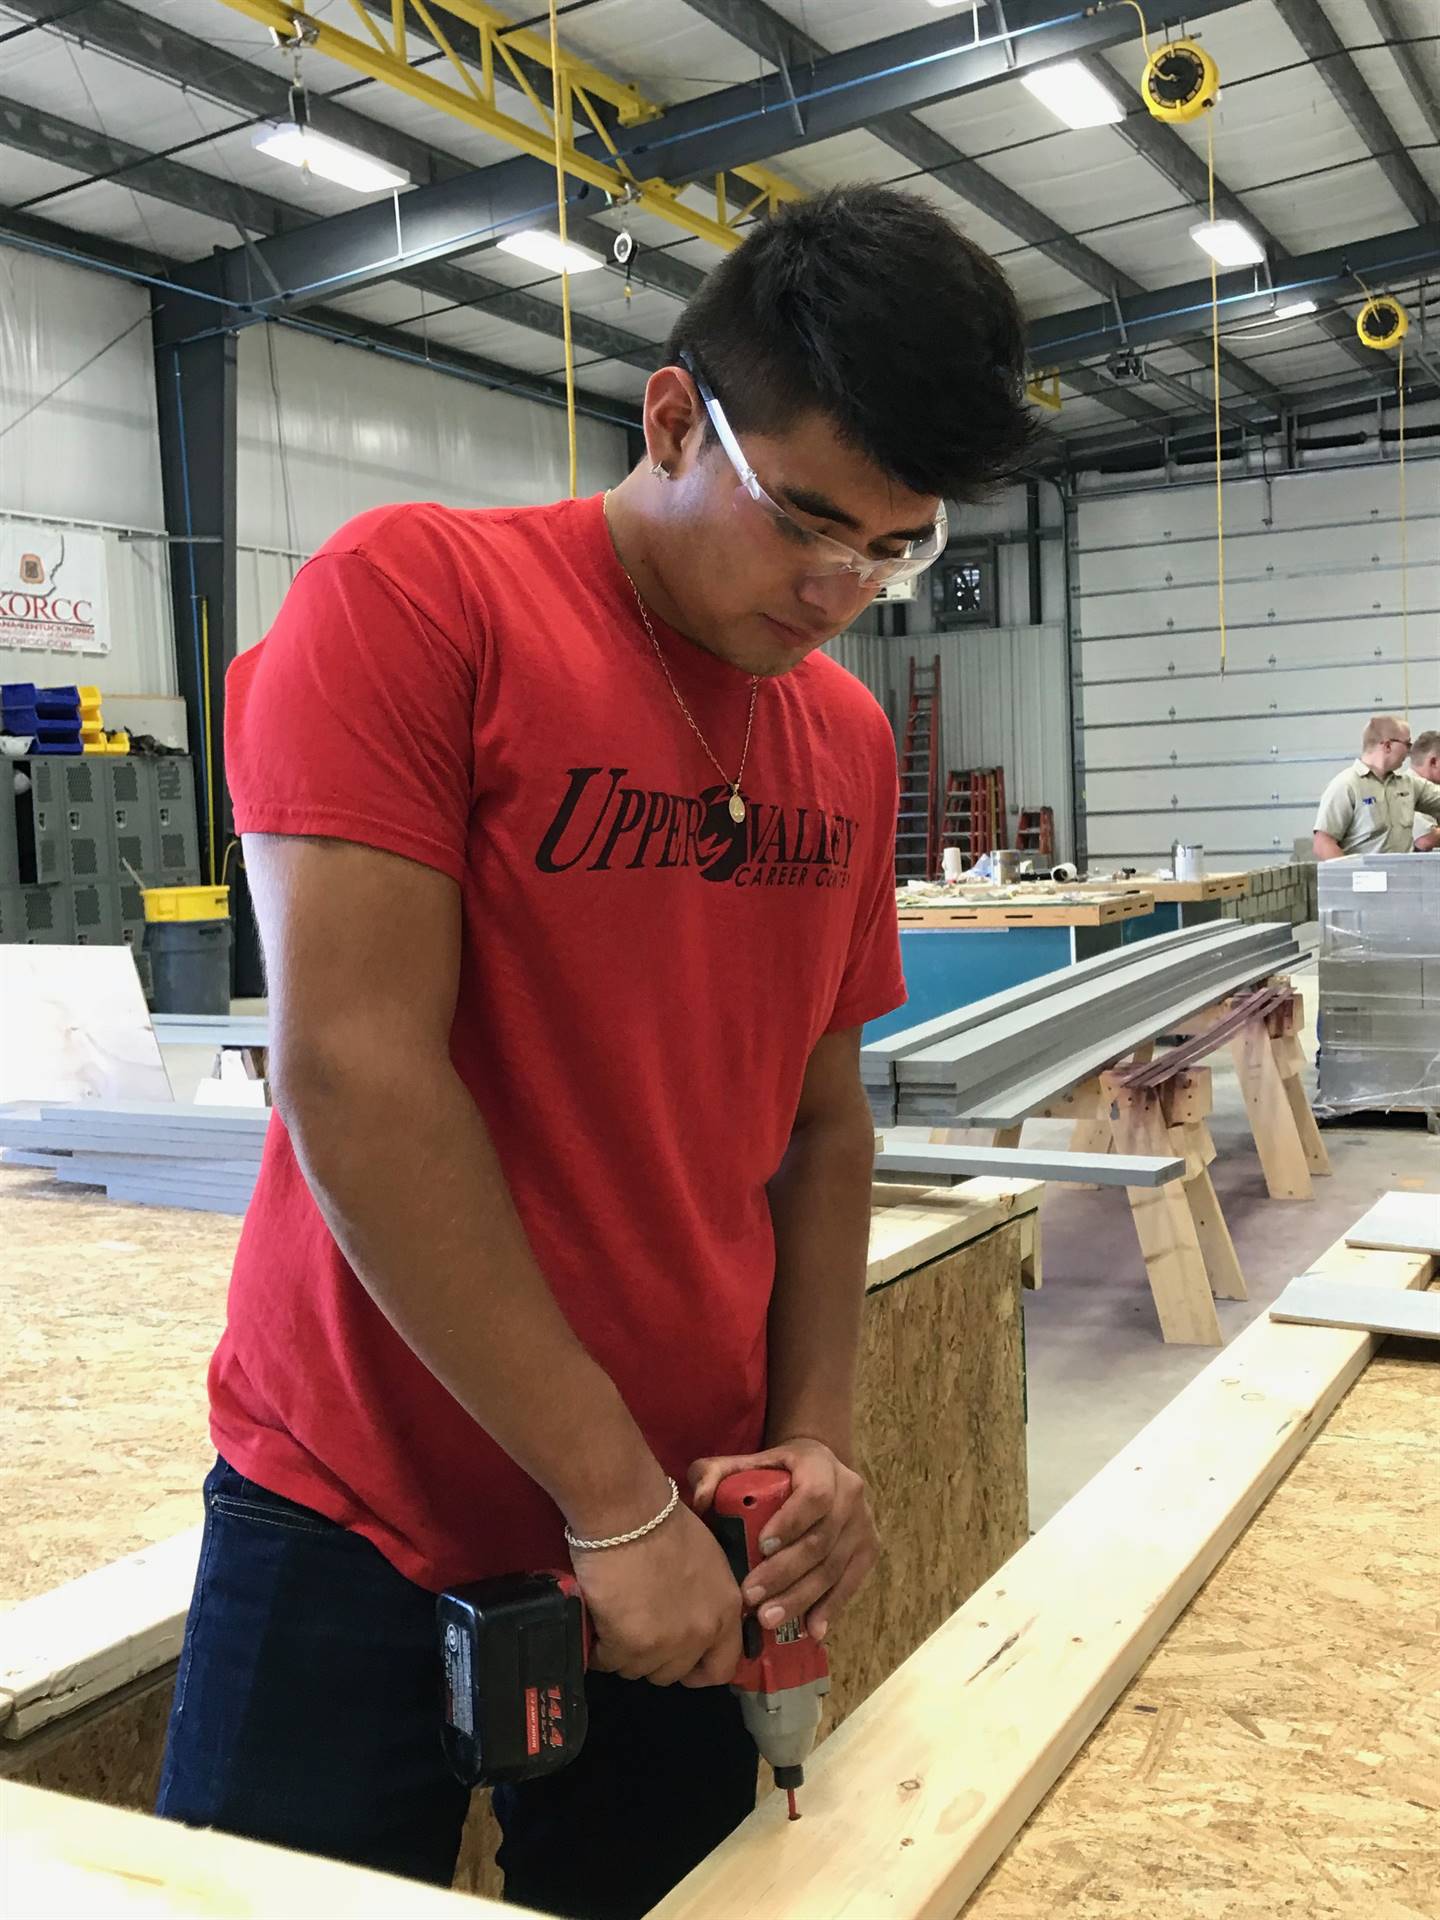 Student drilling nails in wood